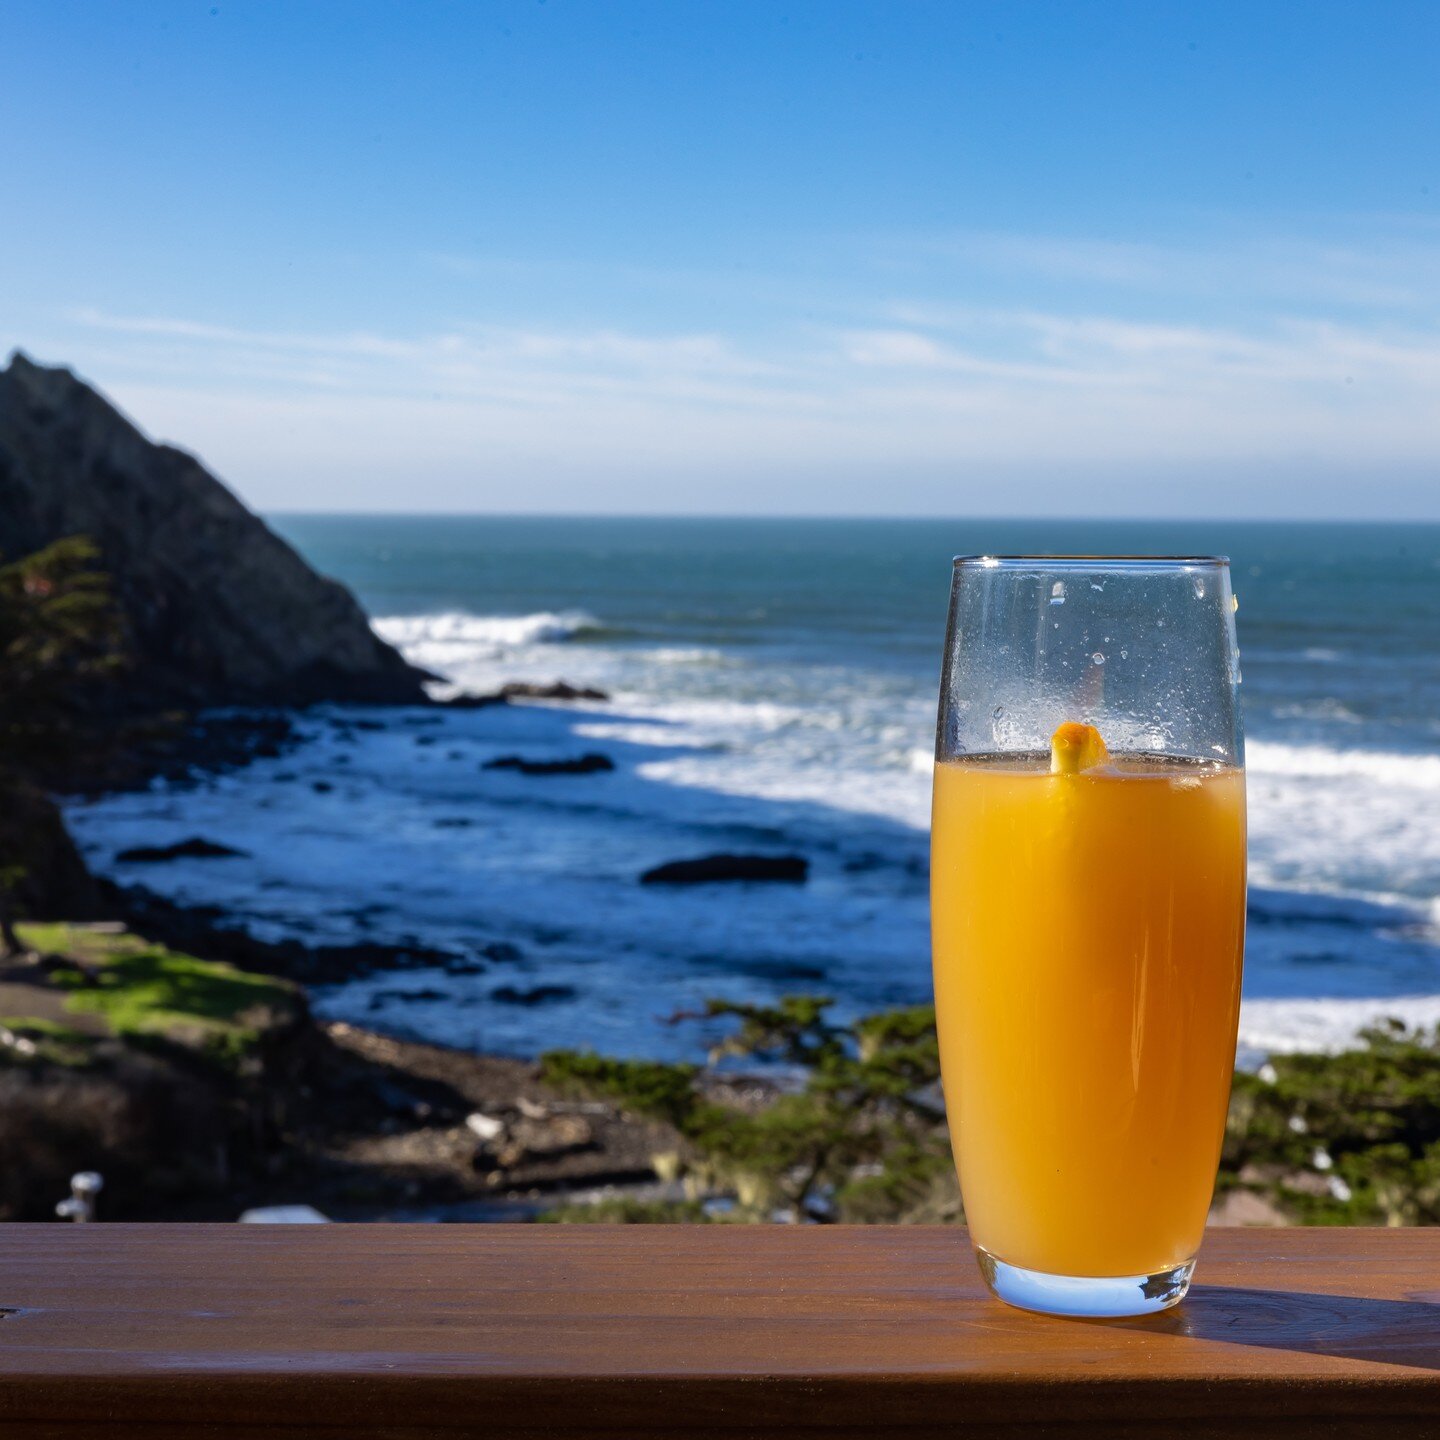 Or sit back and enjoy Karen's delicious mimosa's!